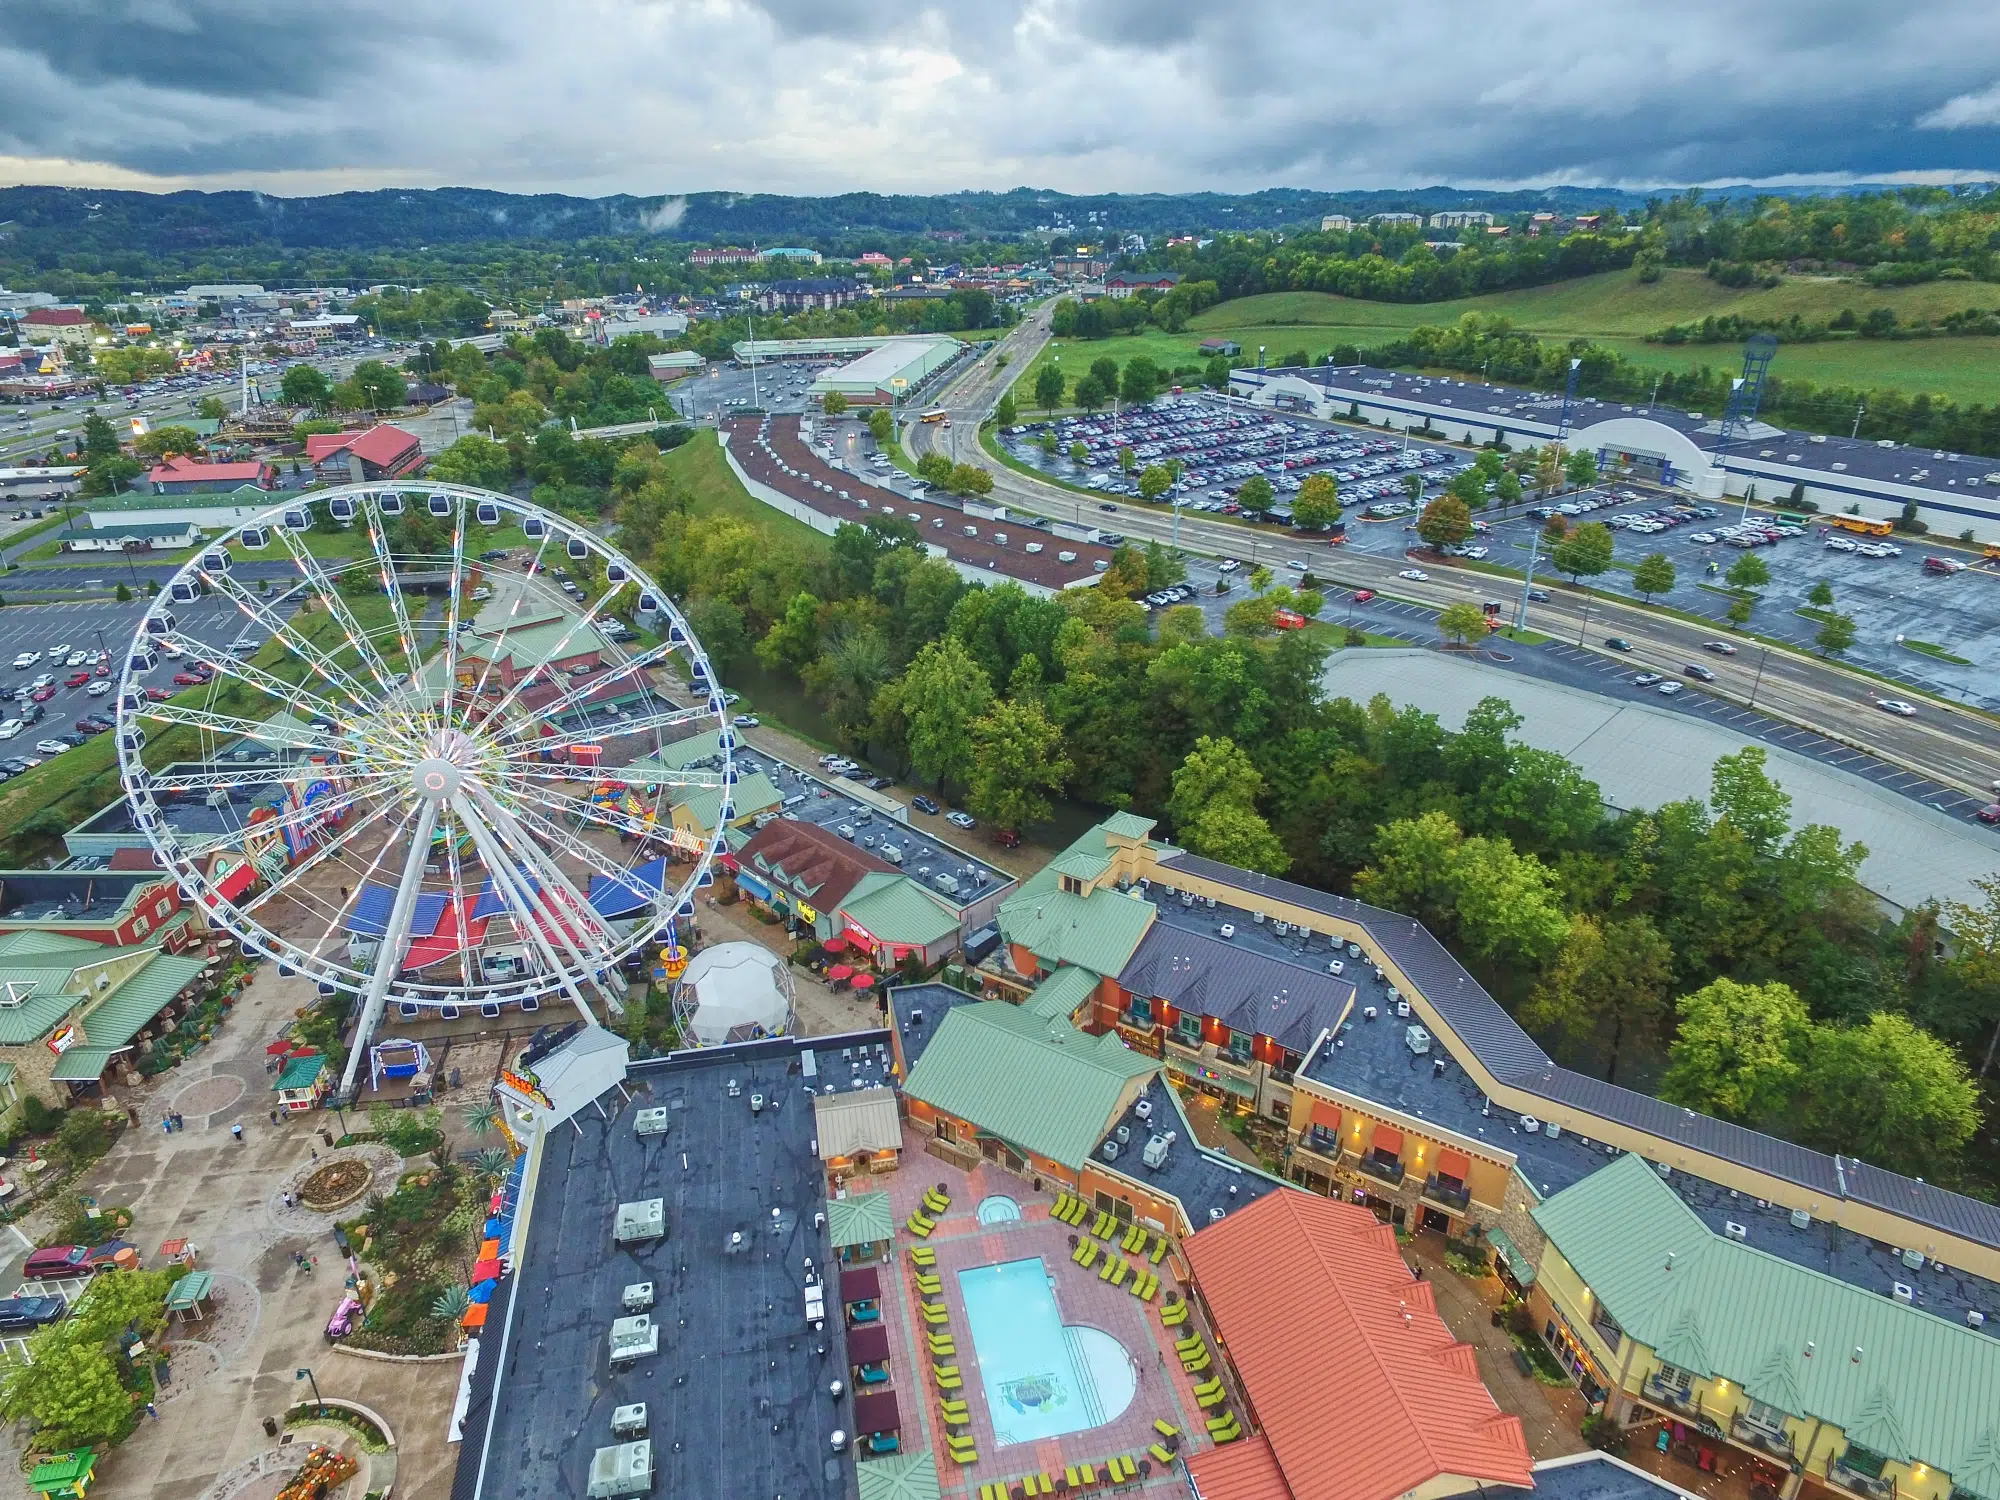 Vacation in Pigeon Forge